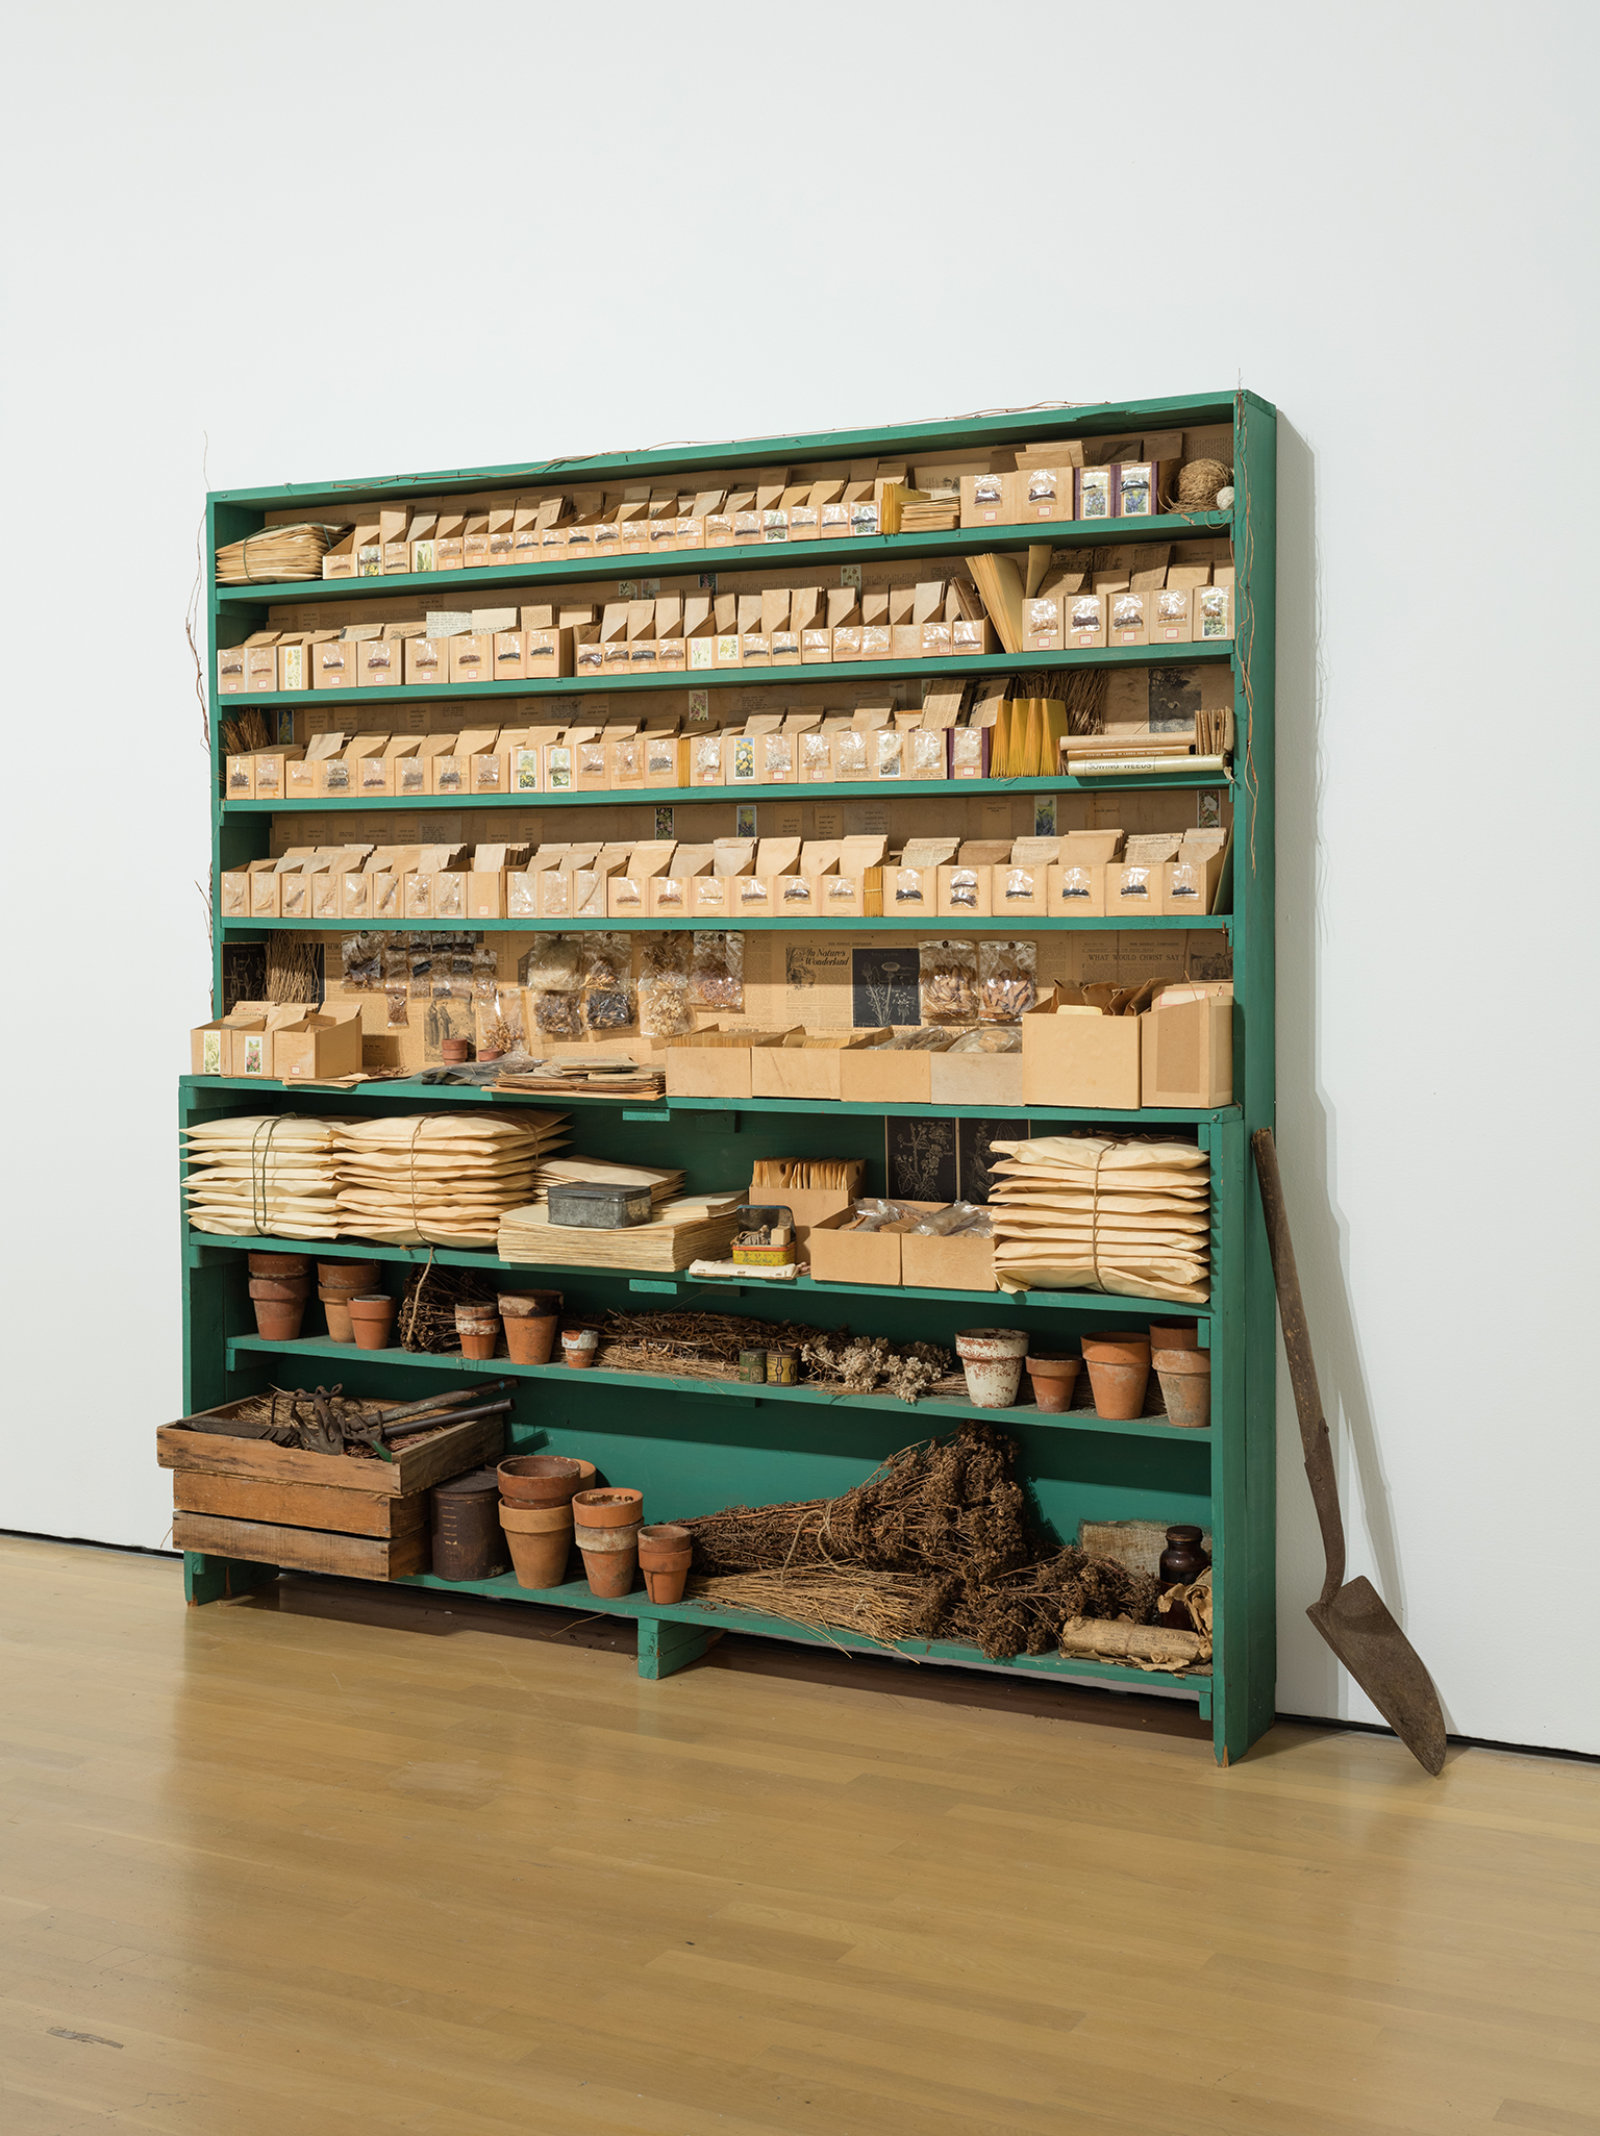 Liz Magor, Sowing Weeds in Lanes and Ditches, 1976,  wooden shelf, seeds, grass, envelopes, boxes, garden gloves, clay pots, 77 x 77 x 11 in. (196 x 196 x 27 cm)